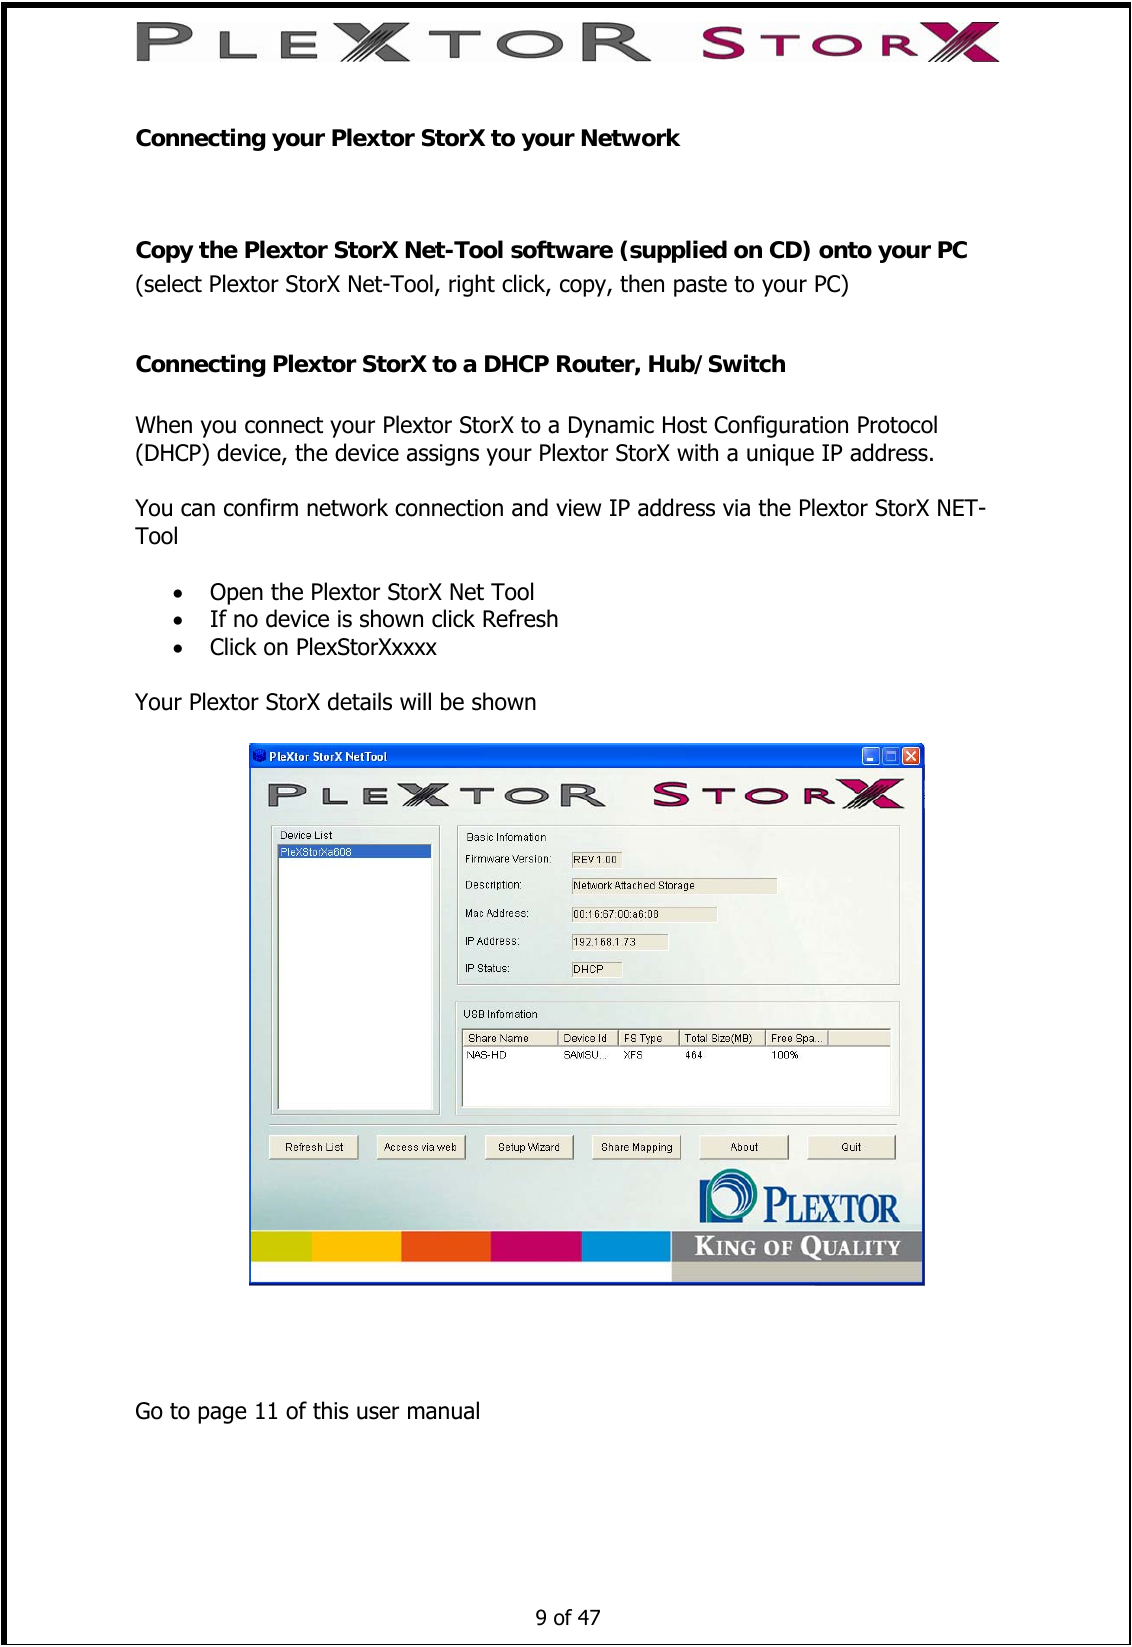  Connecting your Plextor StorX to your Network  Copy the Plextor StorX Net-Tool software (supplied on CD) onto your PC (select Plextor StorX Net-Tool, right click, copy, then paste to your PC)  Connecting Plextor StorX to a DHCP Router, Hub/Switch  When you connect your Plextor StorX to a Dynamic Host Configuration Protocol (DHCP) device, the device assigns your Plextor StorX with a unique IP address.  You can confirm network connection and view IP address via the Plextor StorX NET-Tool   • Open the Plextor StorX Net Tool • If no device is shown click Refresh • Click on PlexStorXxxxx  Your Plextor StorX details will be shown         9 of 47   Go to page 11 of this user manual 